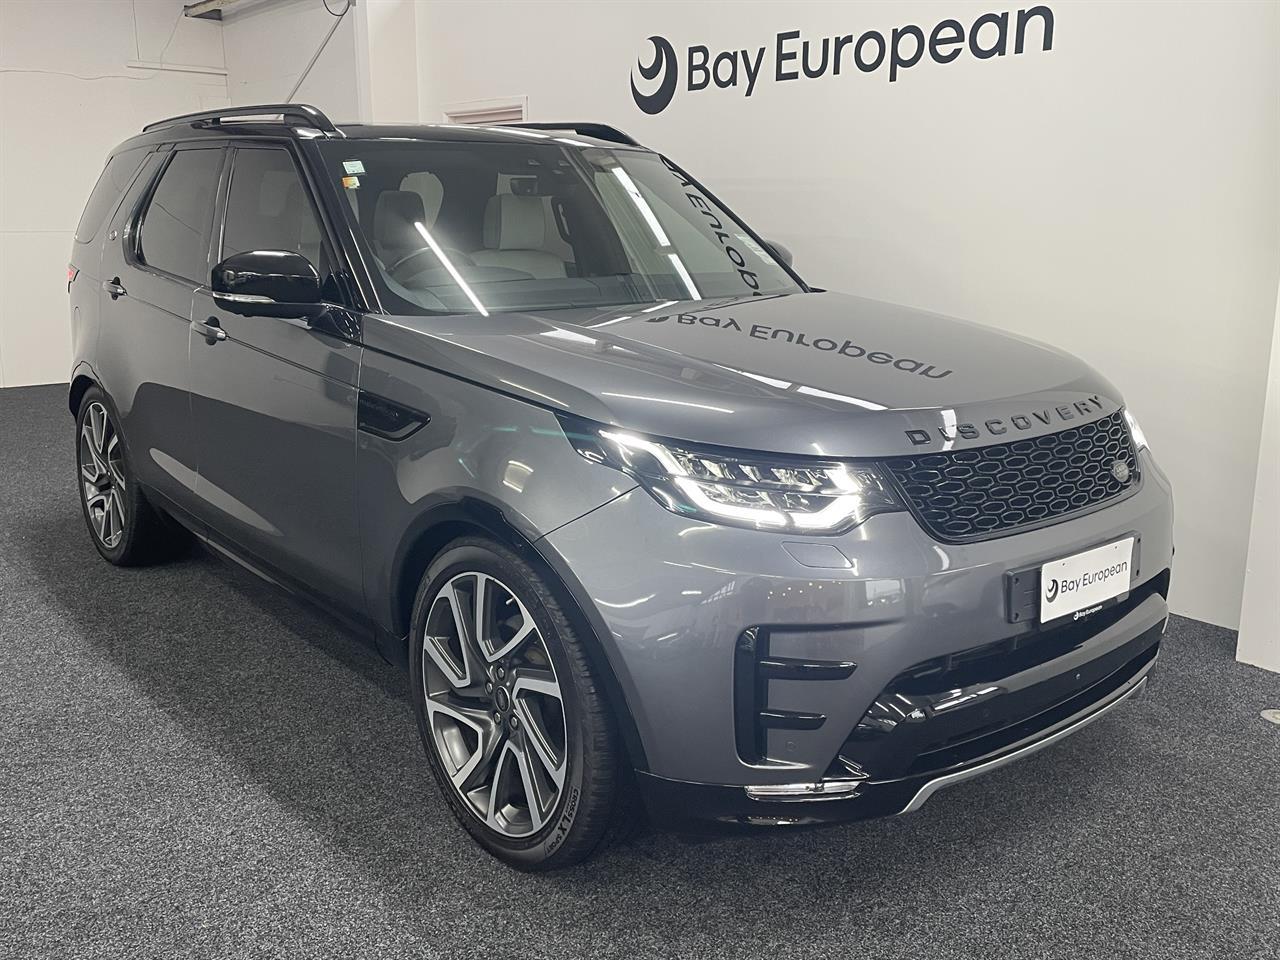 2018 Land Rover Discovery TD6 HSE Luxury 3.0D 7 Seater image 3